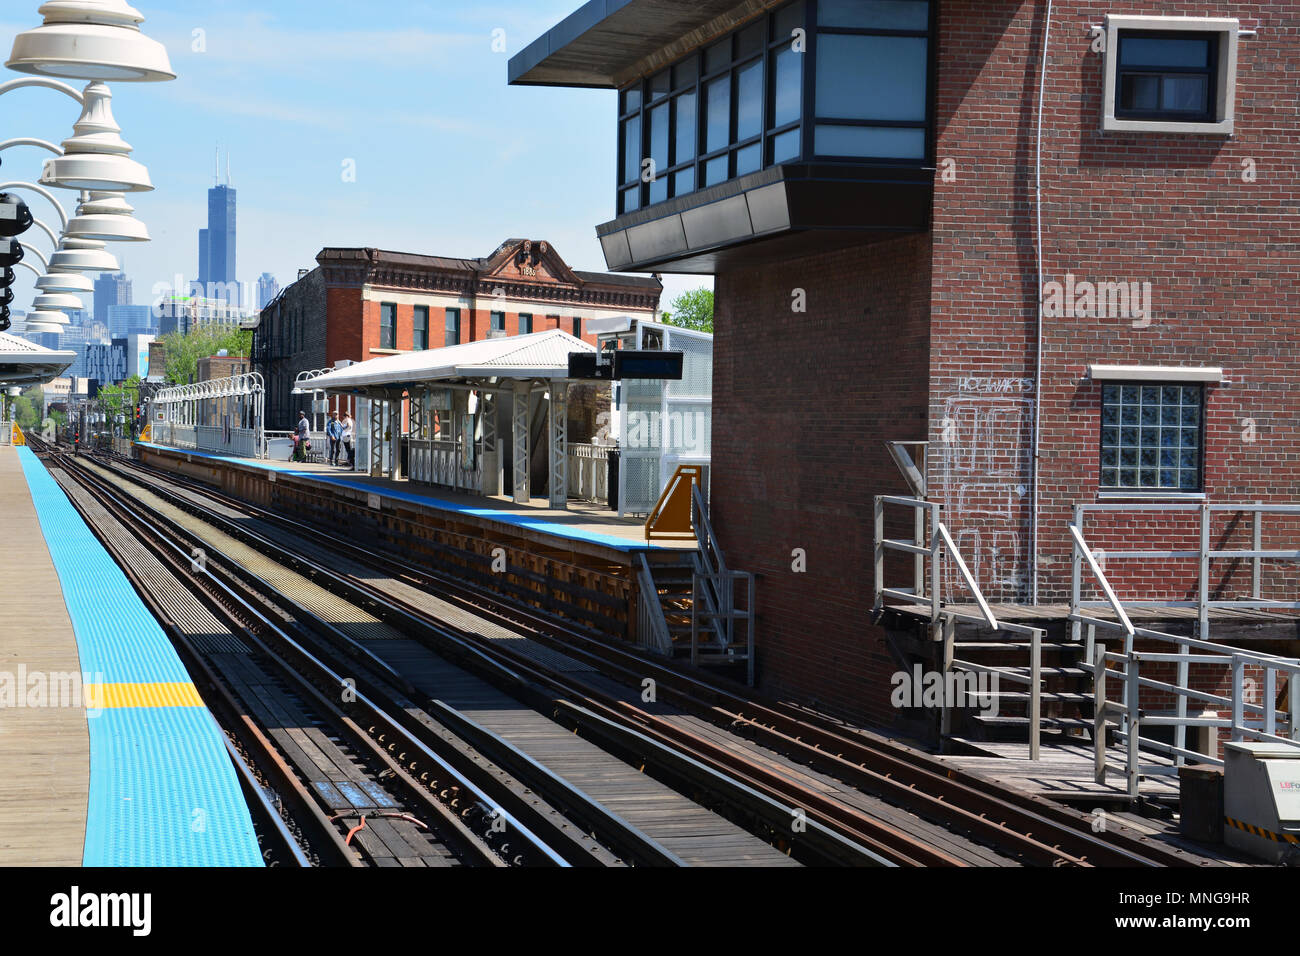 The Damen Ave. L train blue line station in Chicago's Wicker Park neighborhood with a magical door to Hogwarts hidden on the side of the control tower Stock Photo